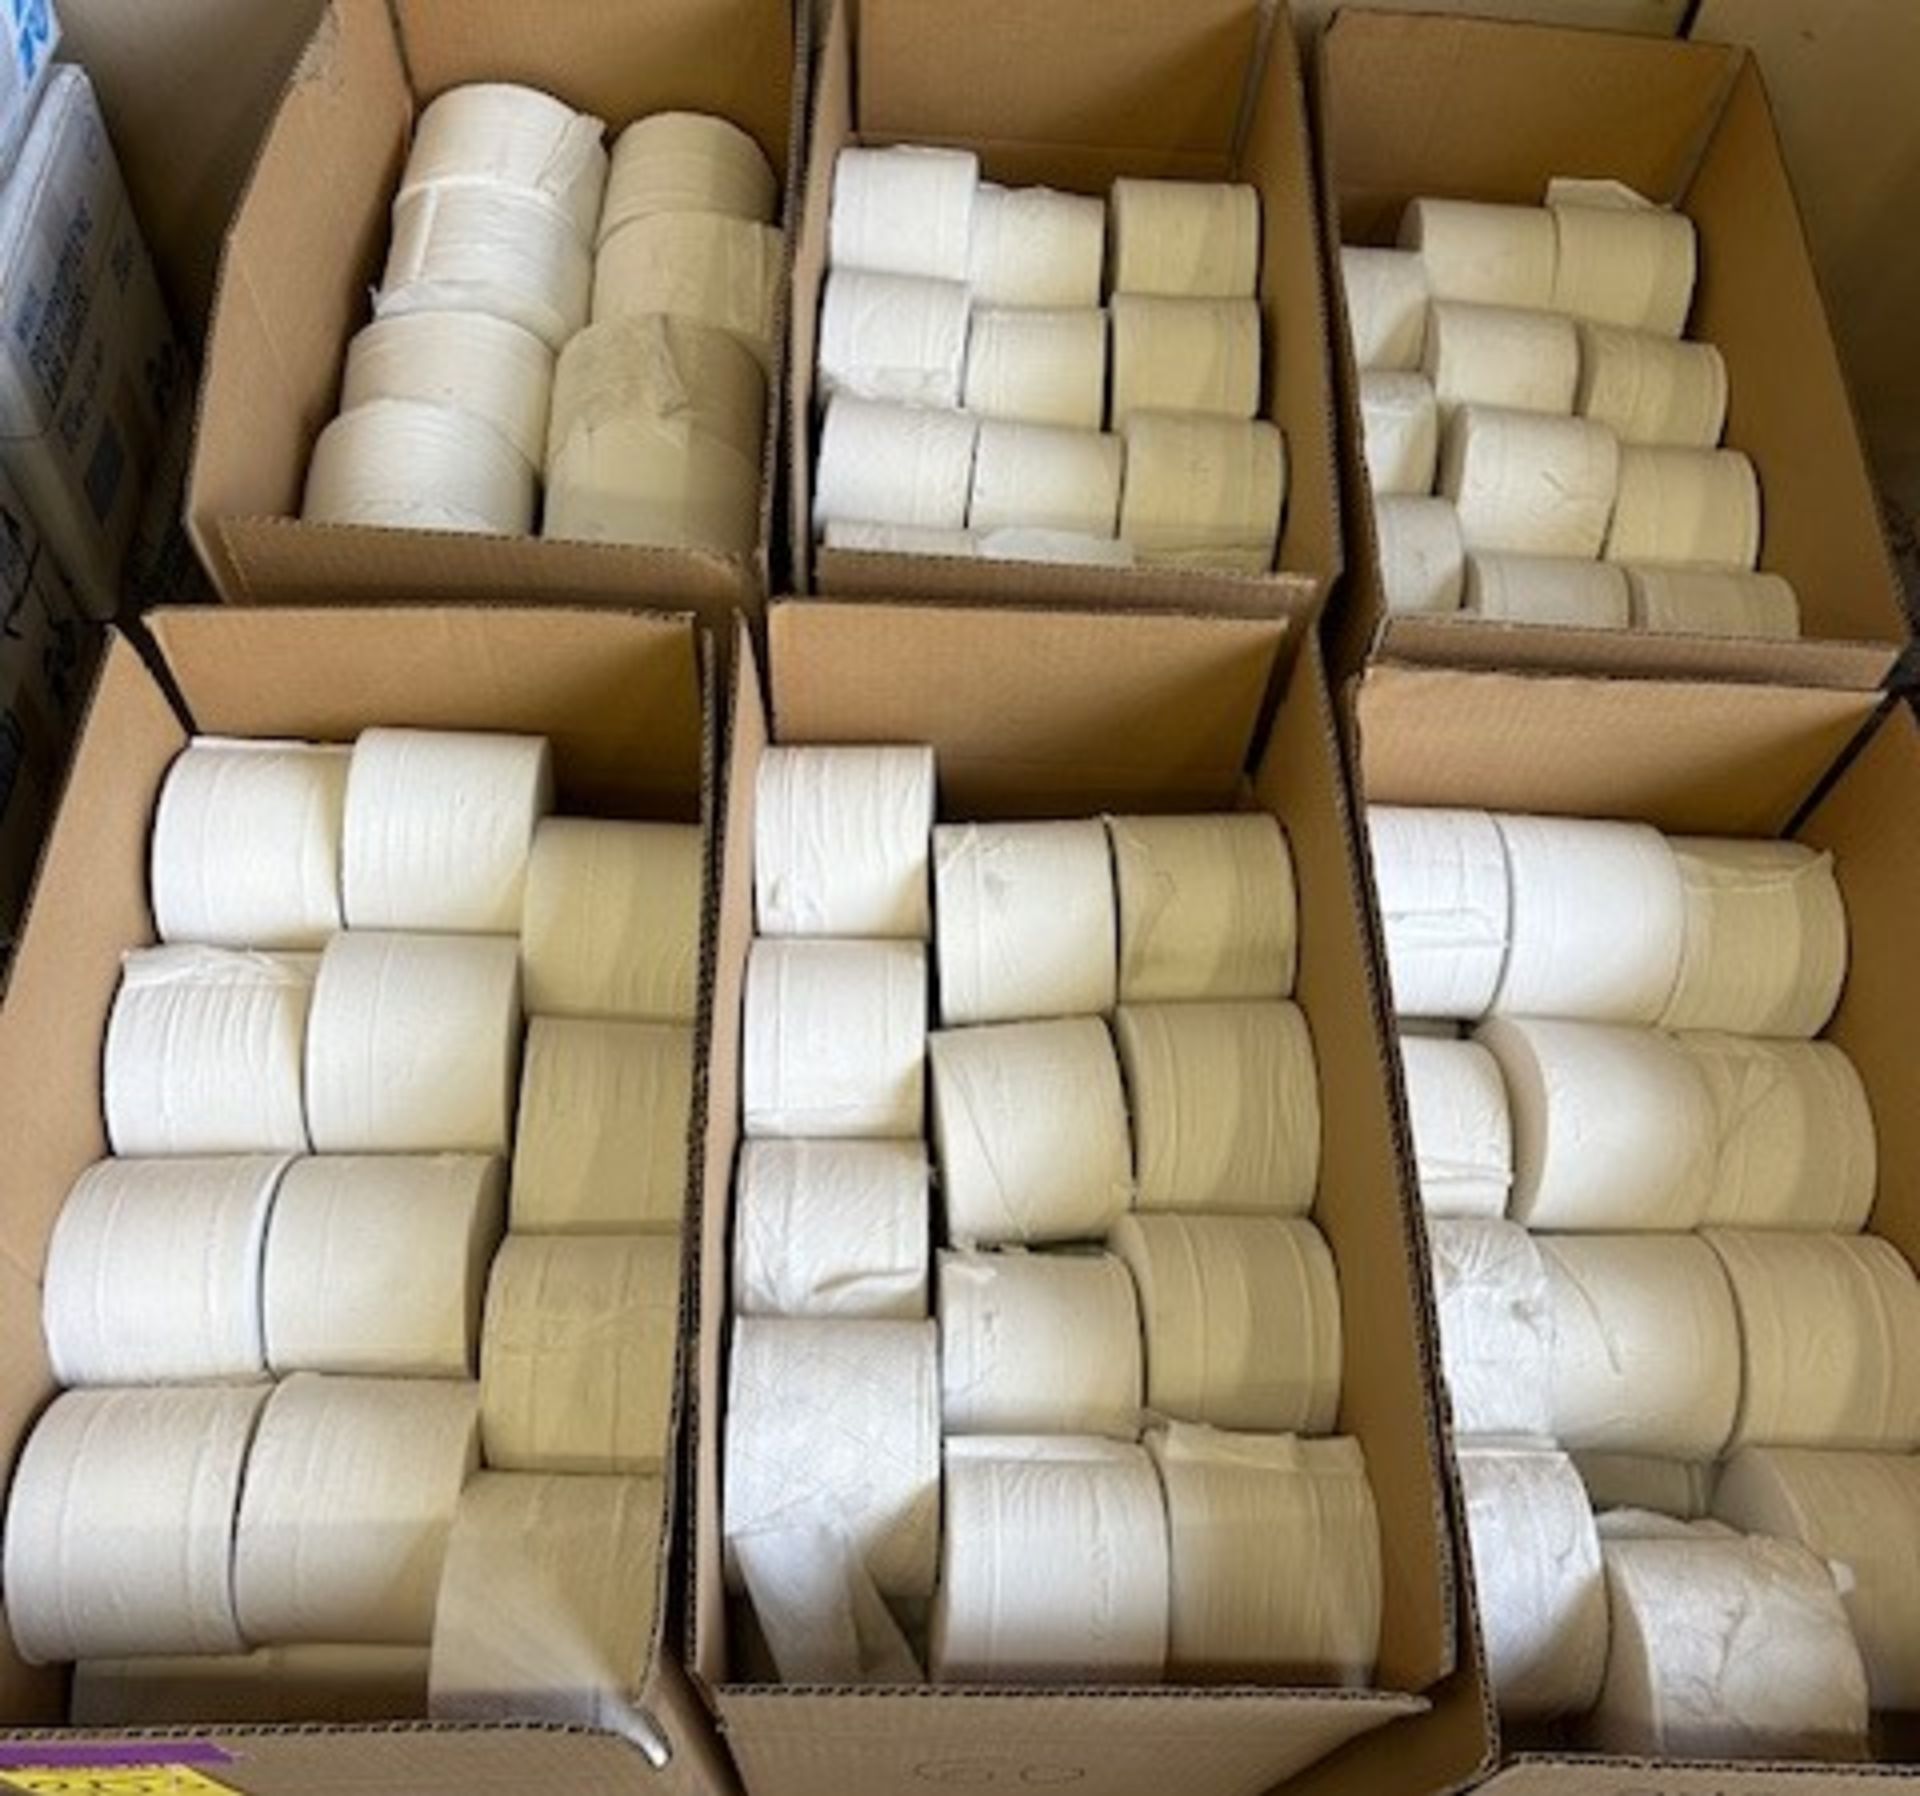 LOT - (340) Rolls Unwrapped Toilet Tissue